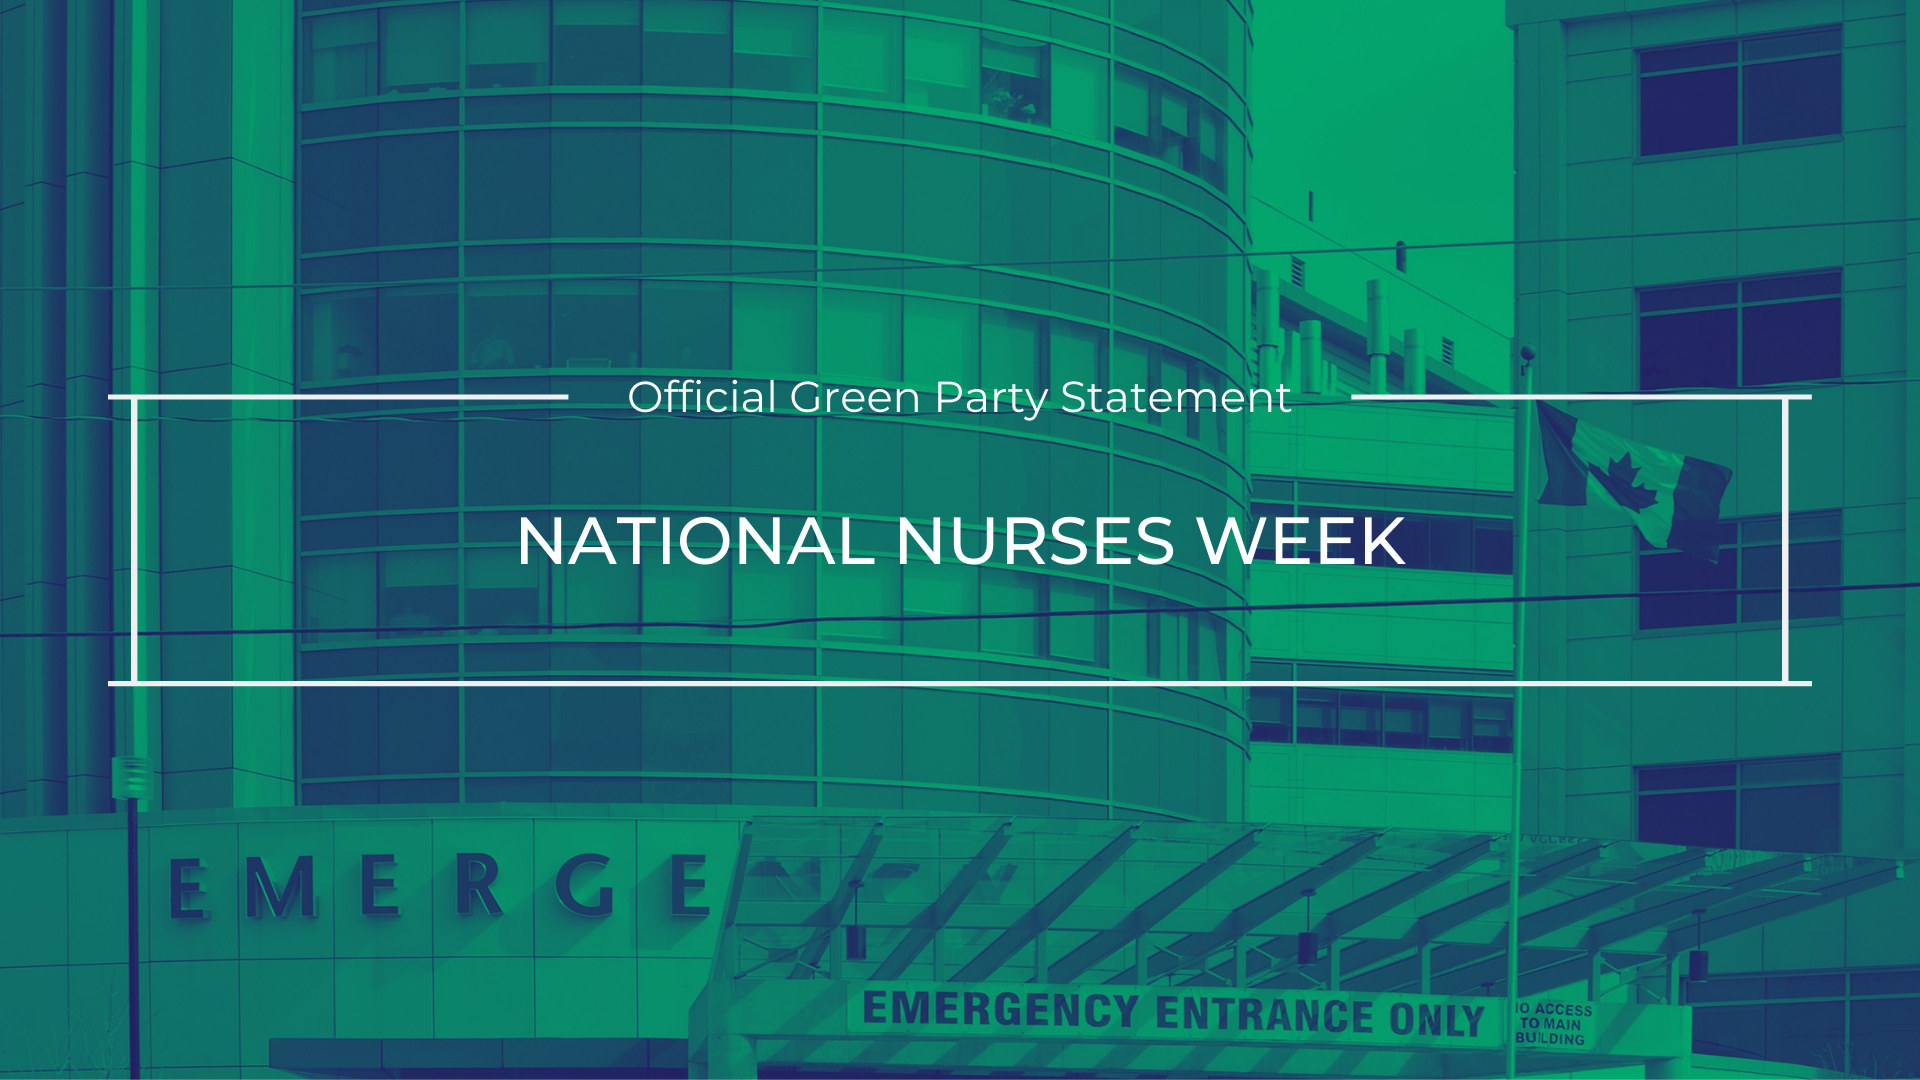 Green Party Statement for National Nurses Week